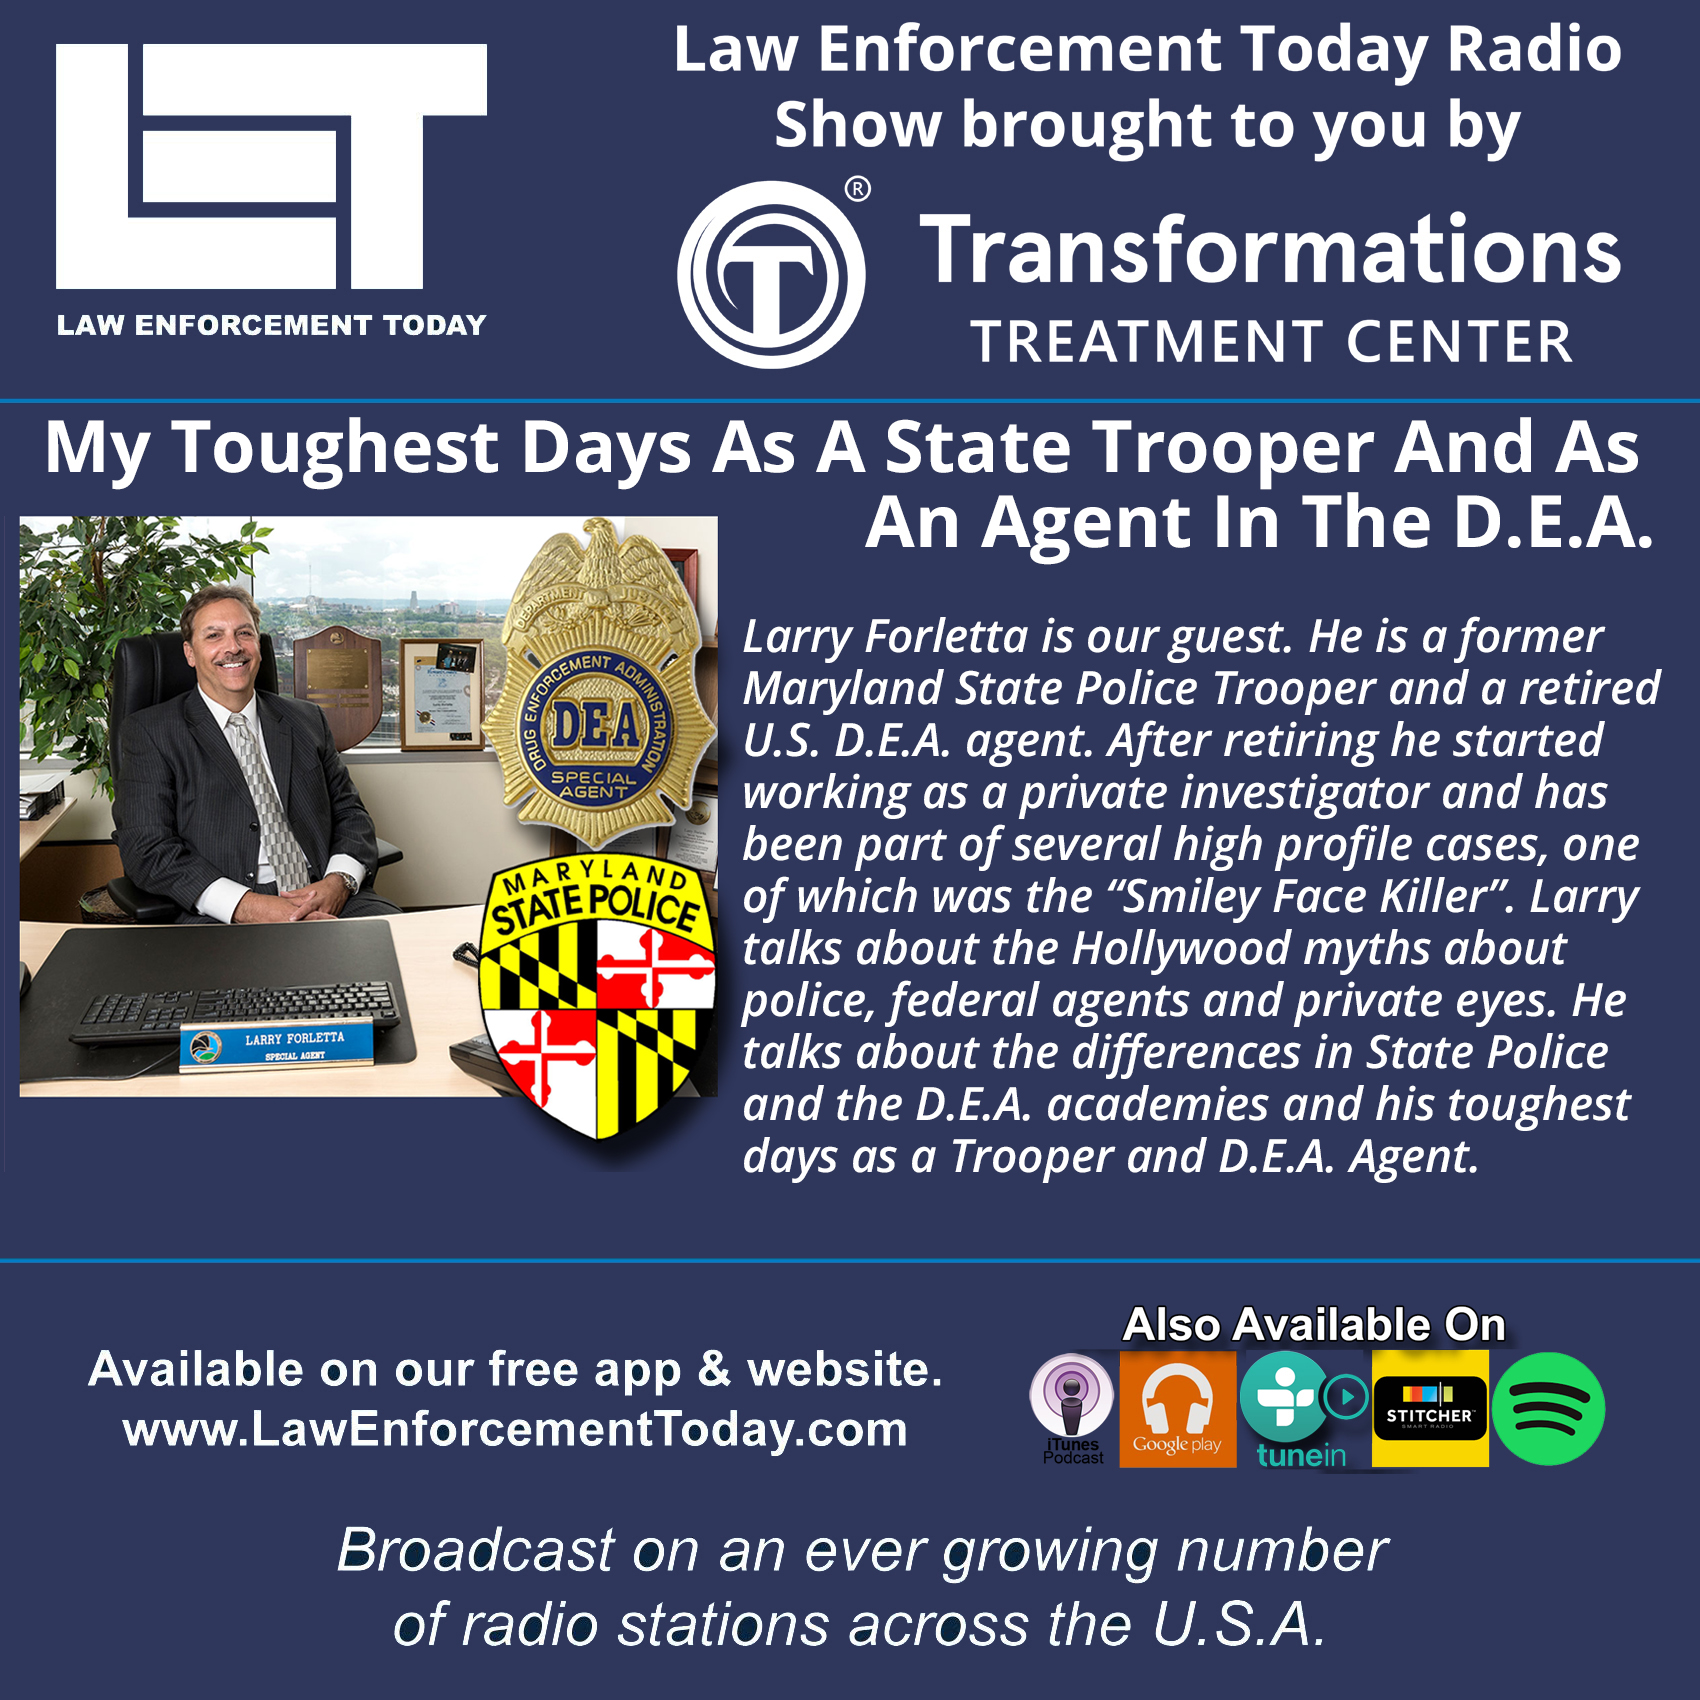 S4E59: State Trooper To The D.E.A. My Toughest Days.